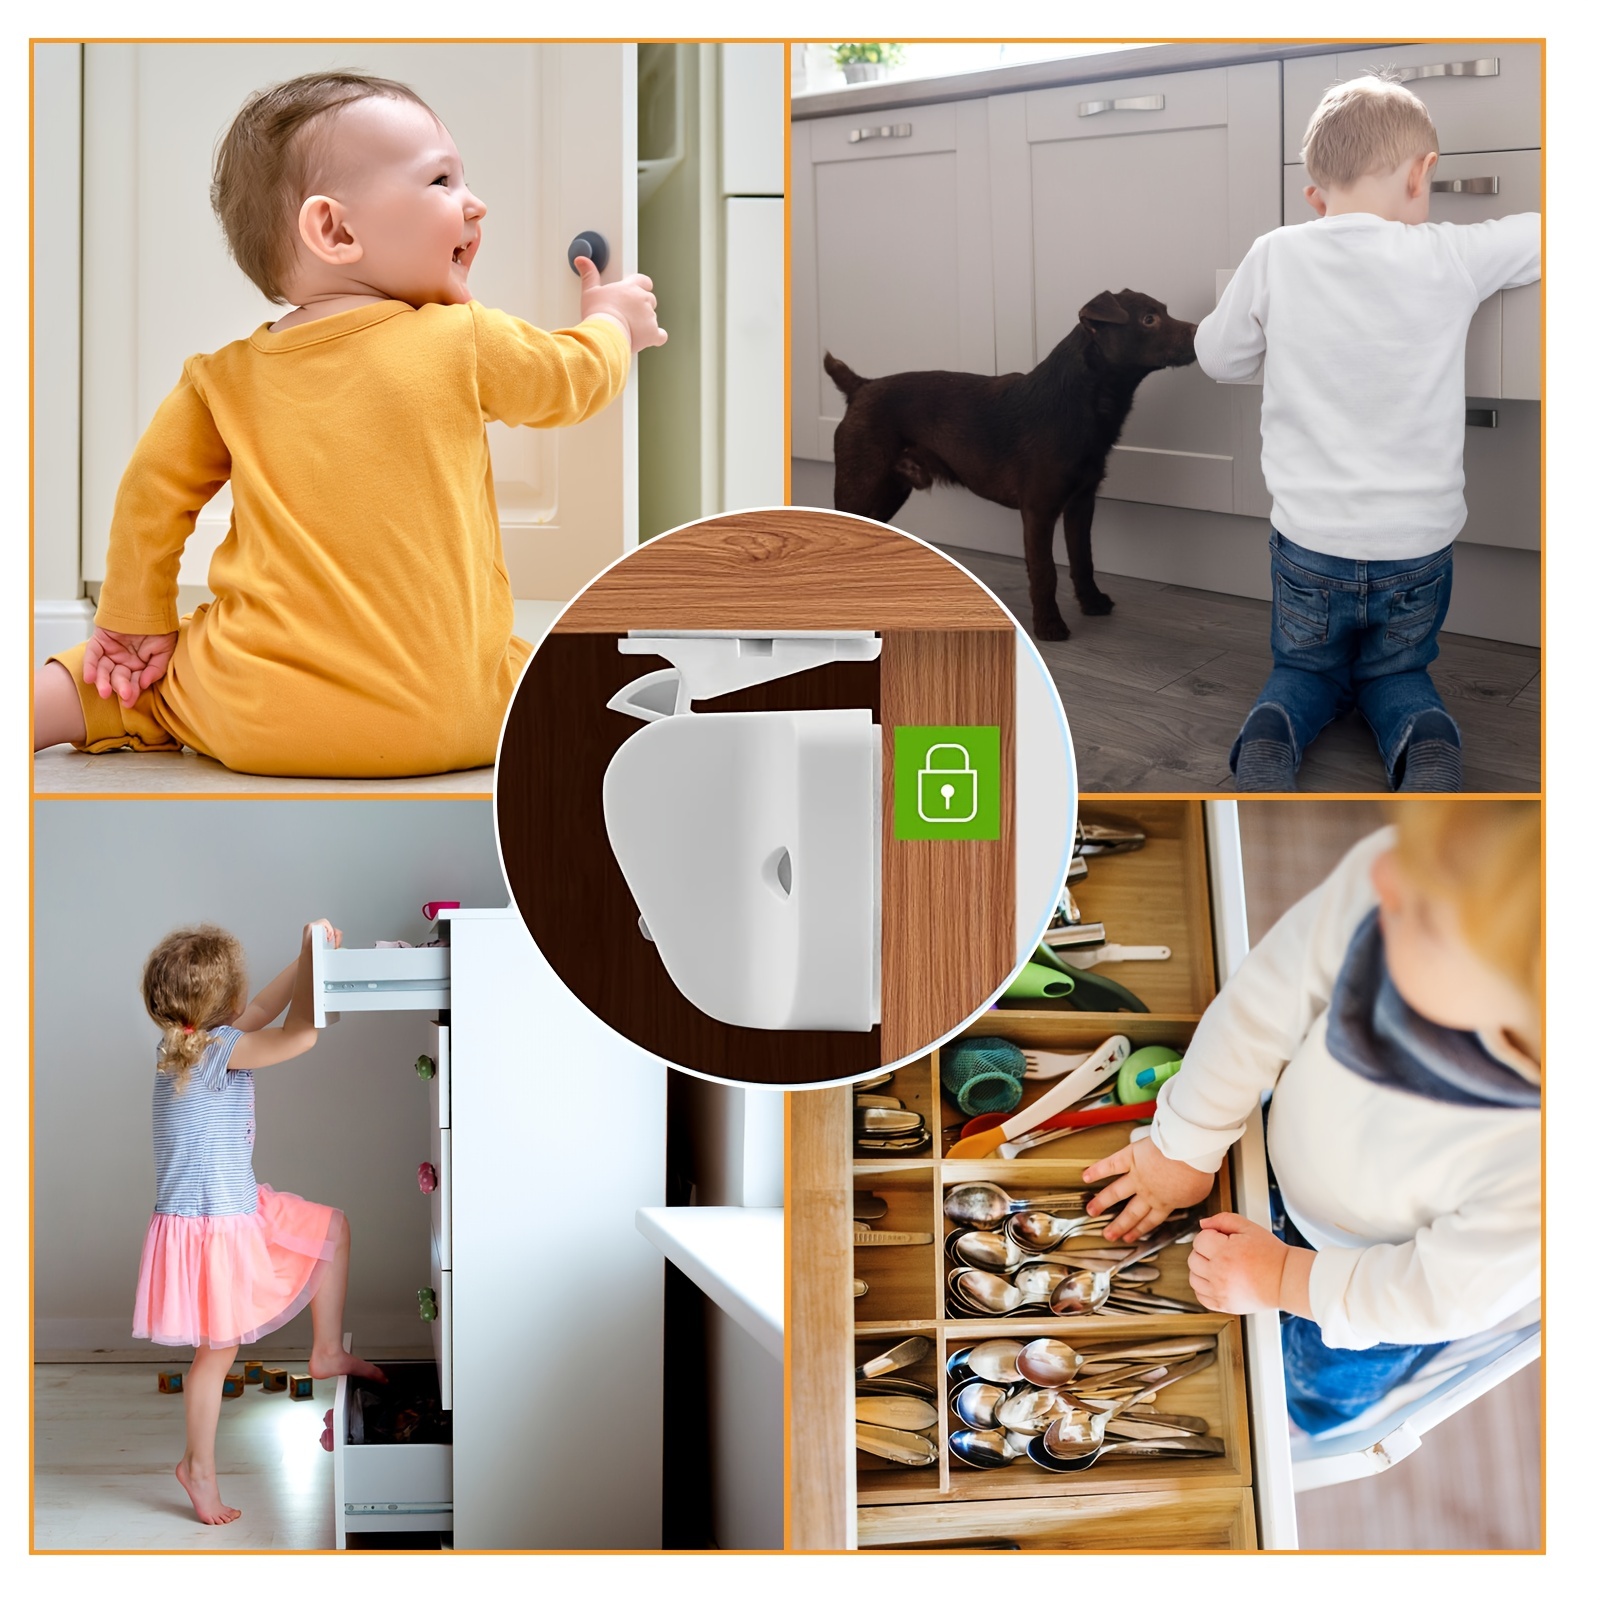 vmaisi Baby Proofing Magnetic Cabinet Locks Child Safety - VMAISI 12 Pack  Children Proof Cupboard Baby Latches - Adhesive Magnet